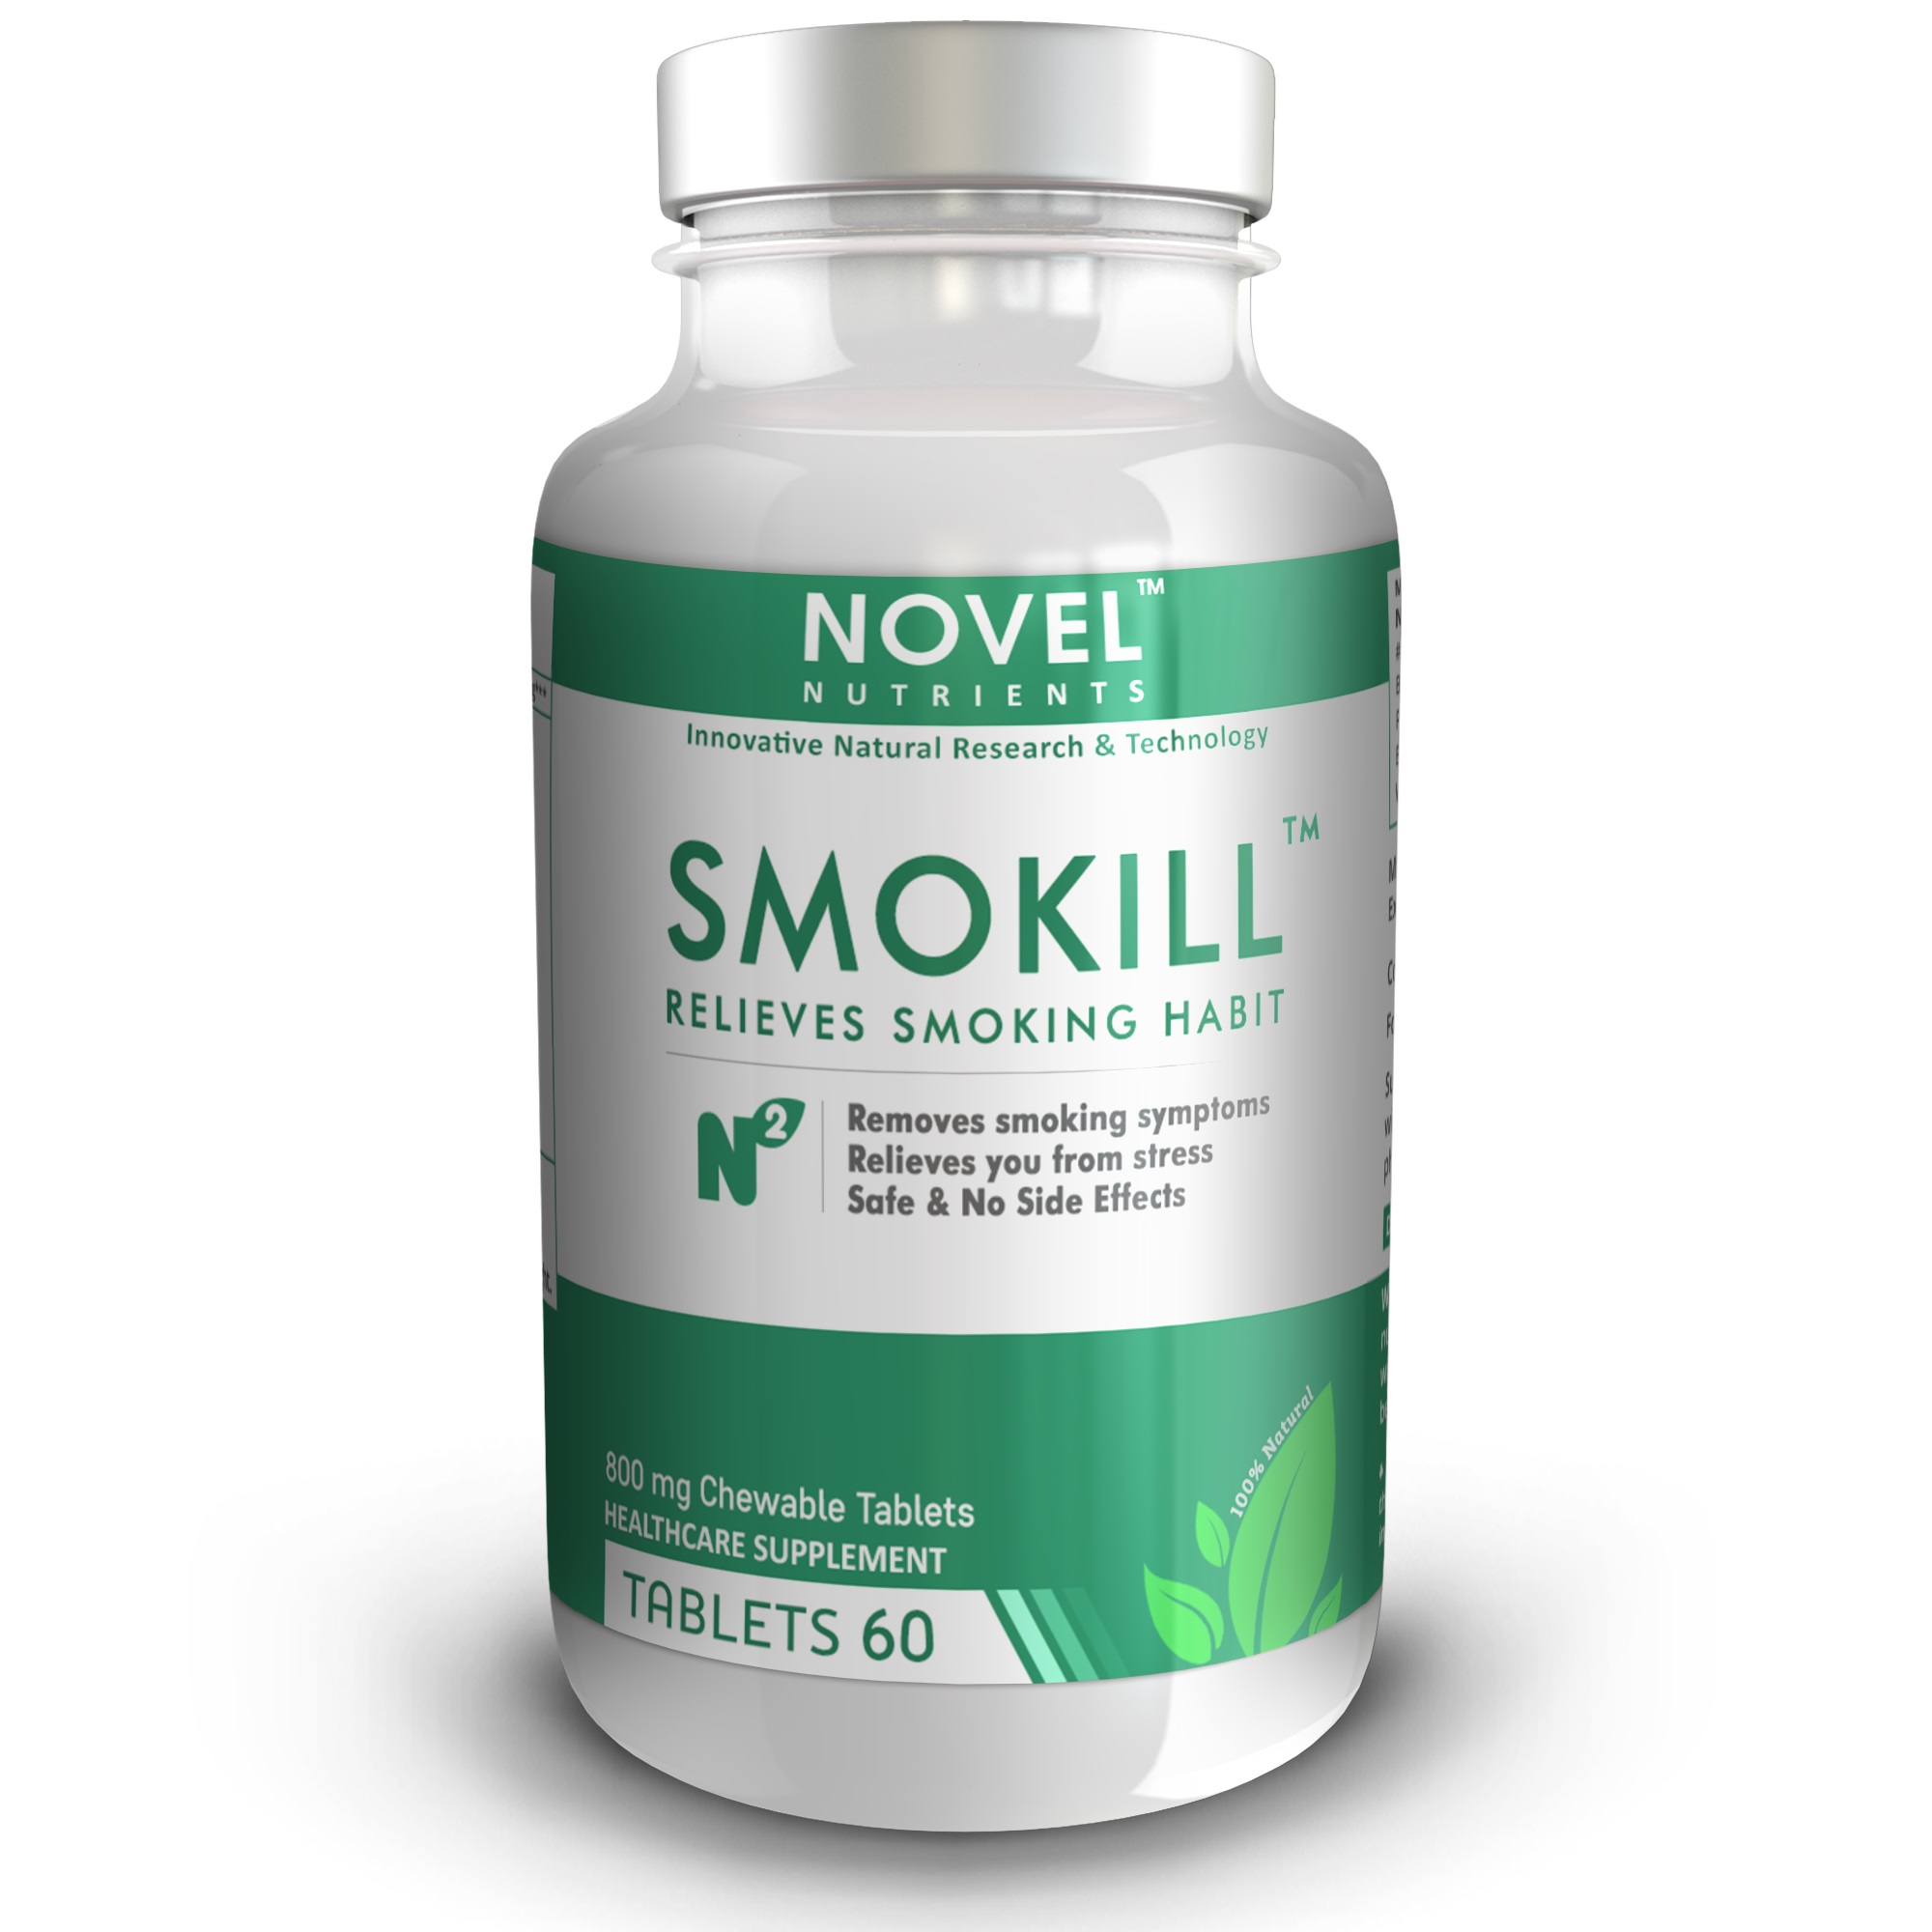 Smokill - TM 800 mg Chewable Tablets - Relieves Smoking Habits